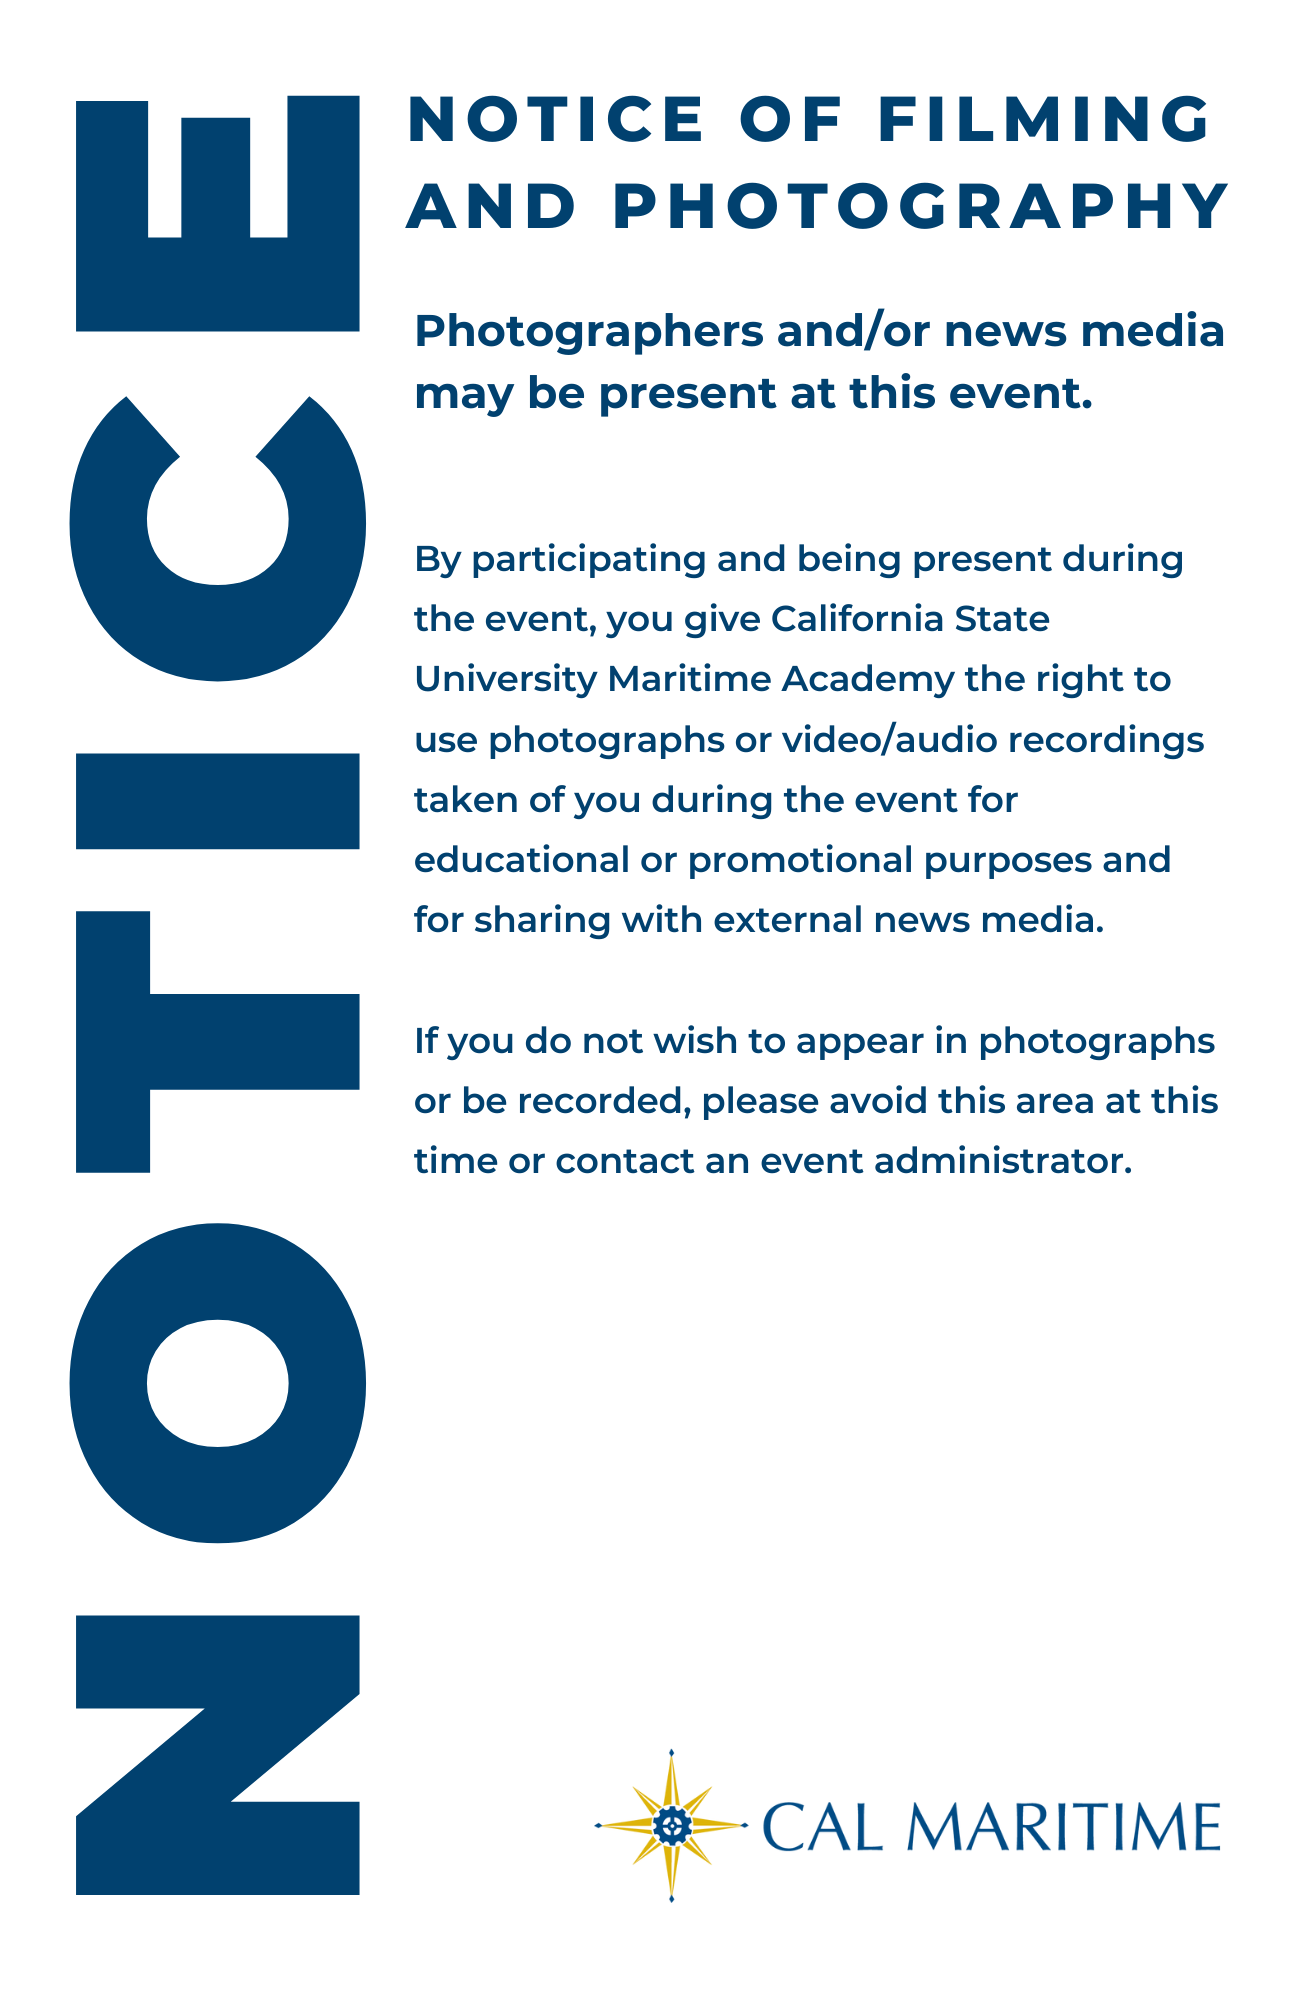 NOTICE OF FILMING AND PHOTOGRAPHY - POSTER BLUE